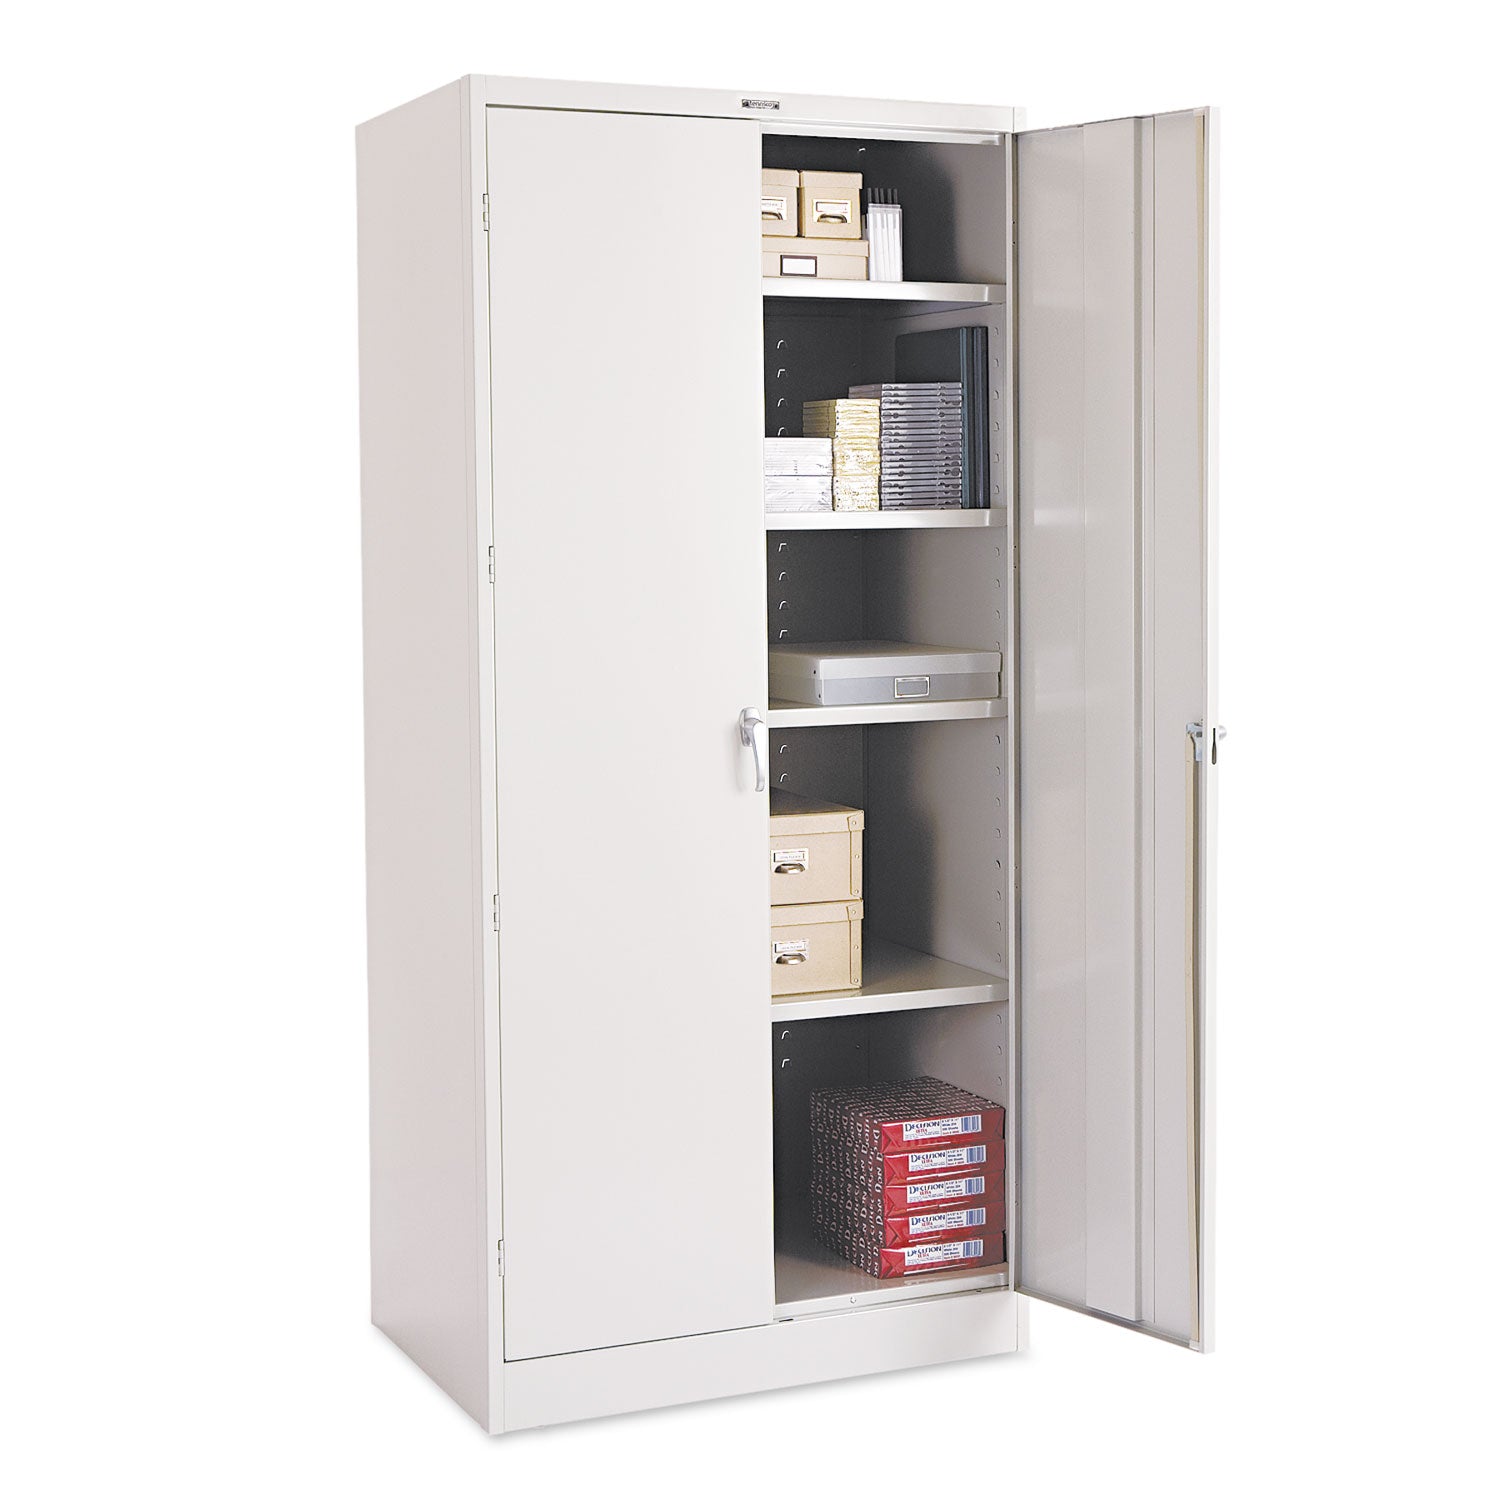 78" High Deluxe Cabinet, 36w x 24d x 78h, Light Gray - 